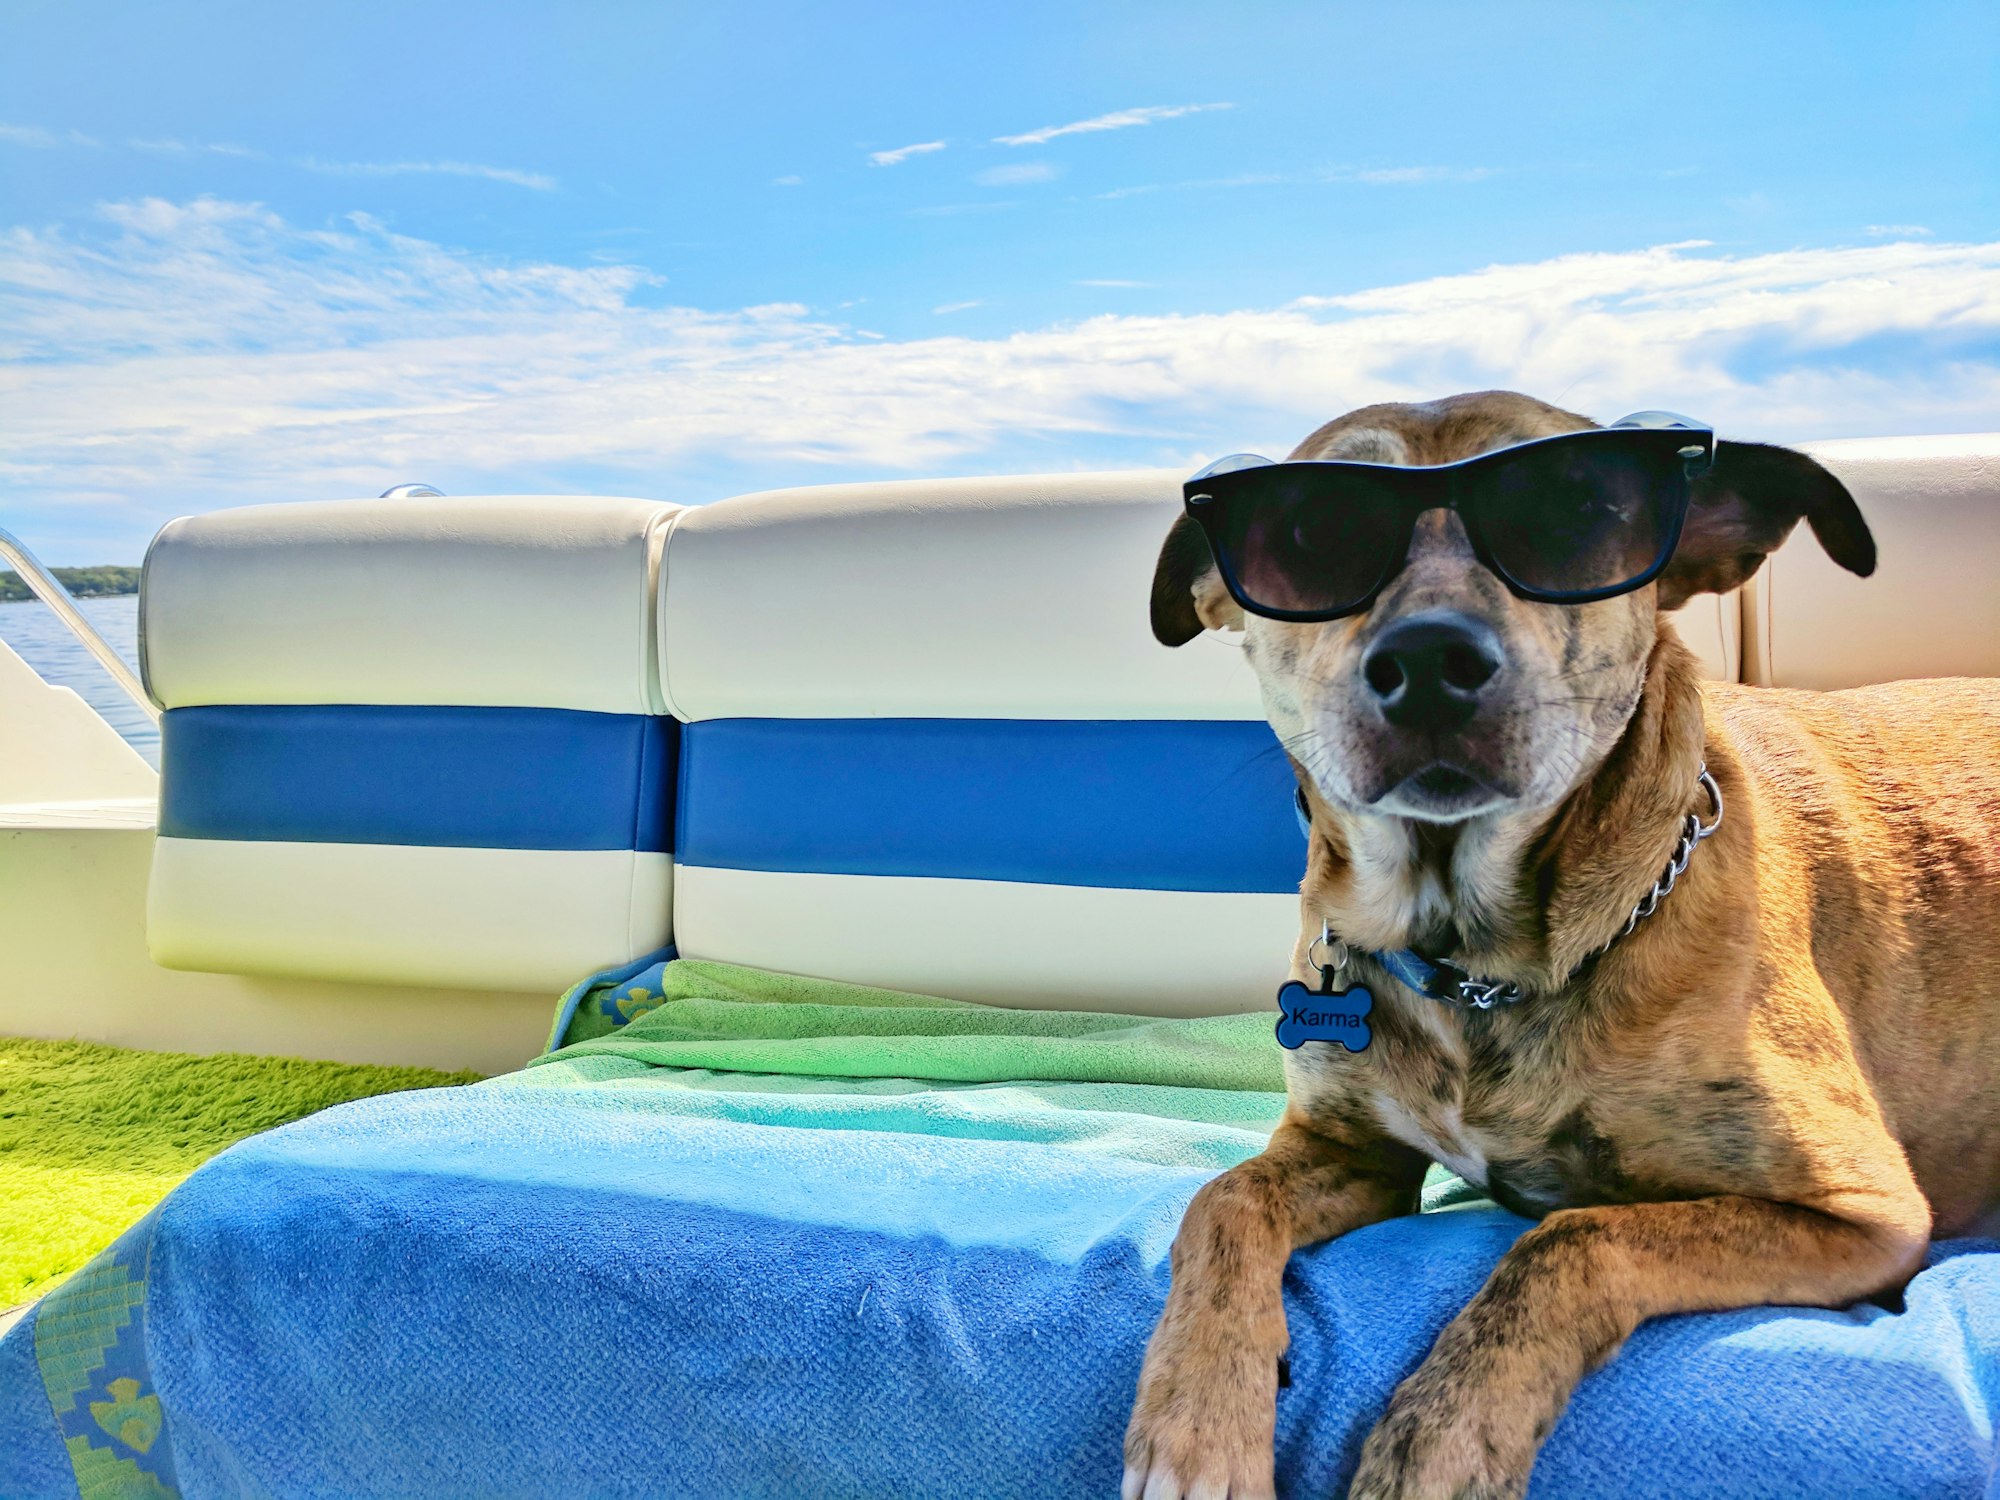 Dog with sunglusses on a boat